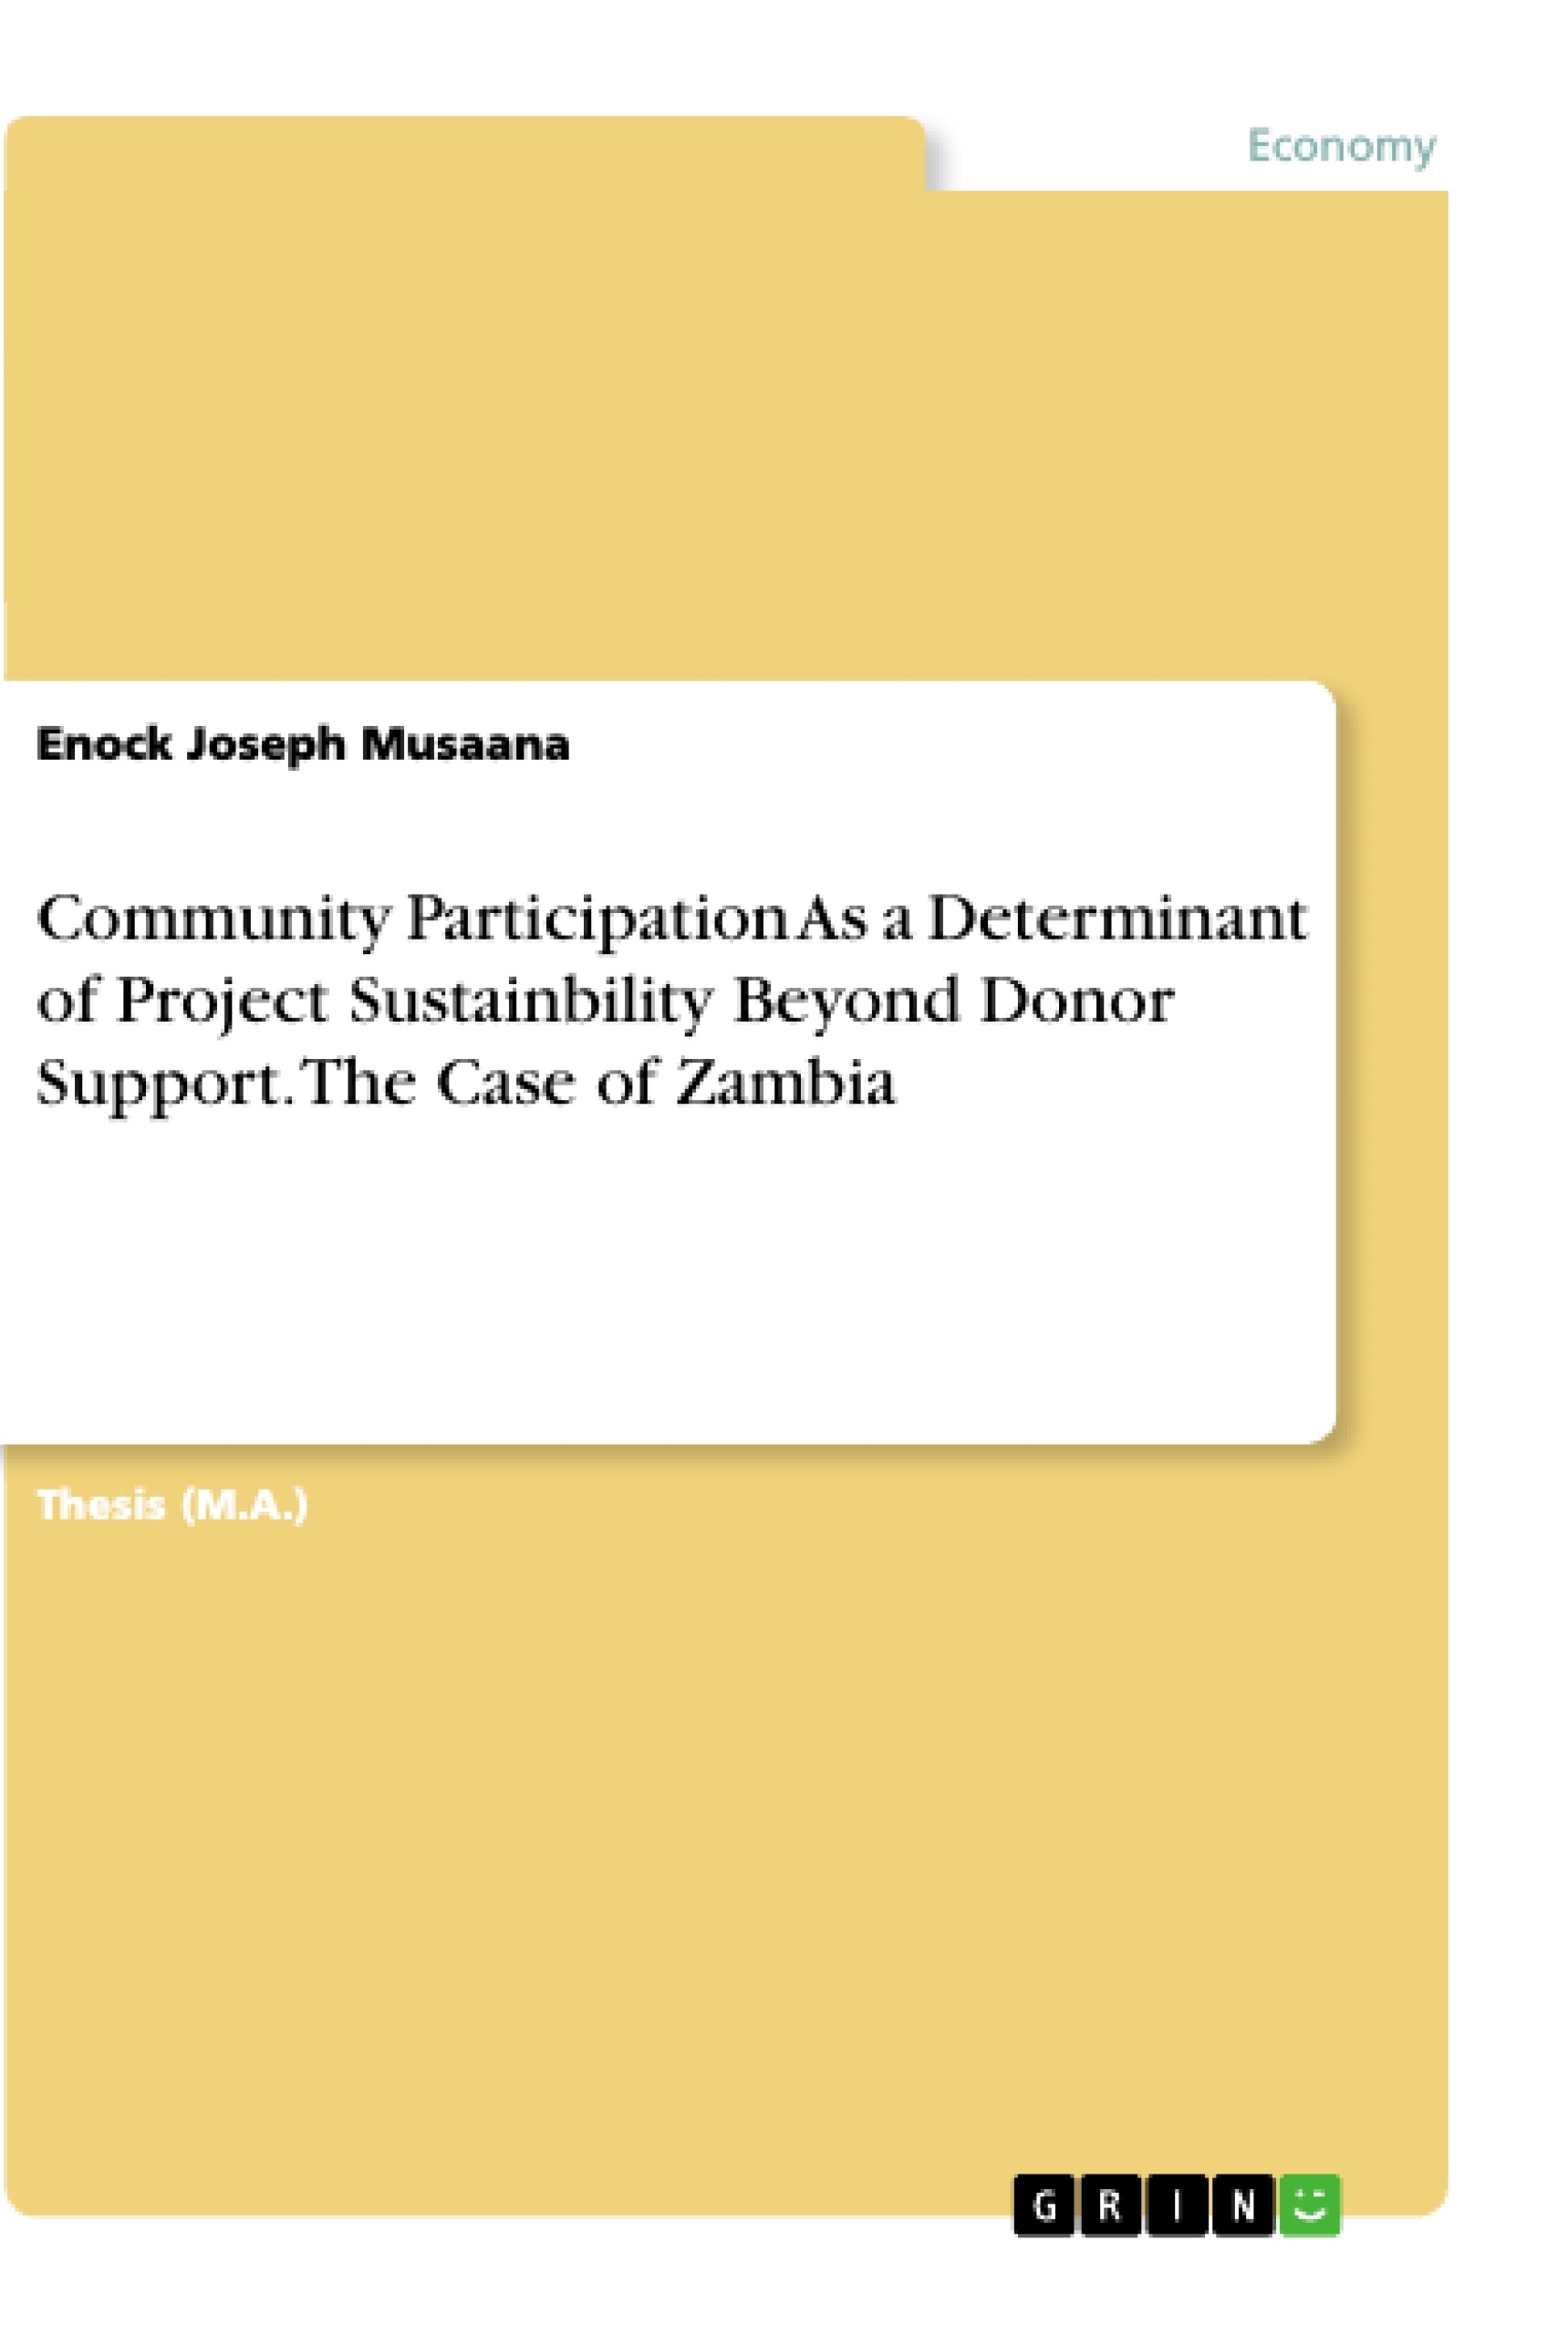 Título: Community Participation As a Determinant of Project Sustainbility Beyond Donor Support. The Case of Zambia